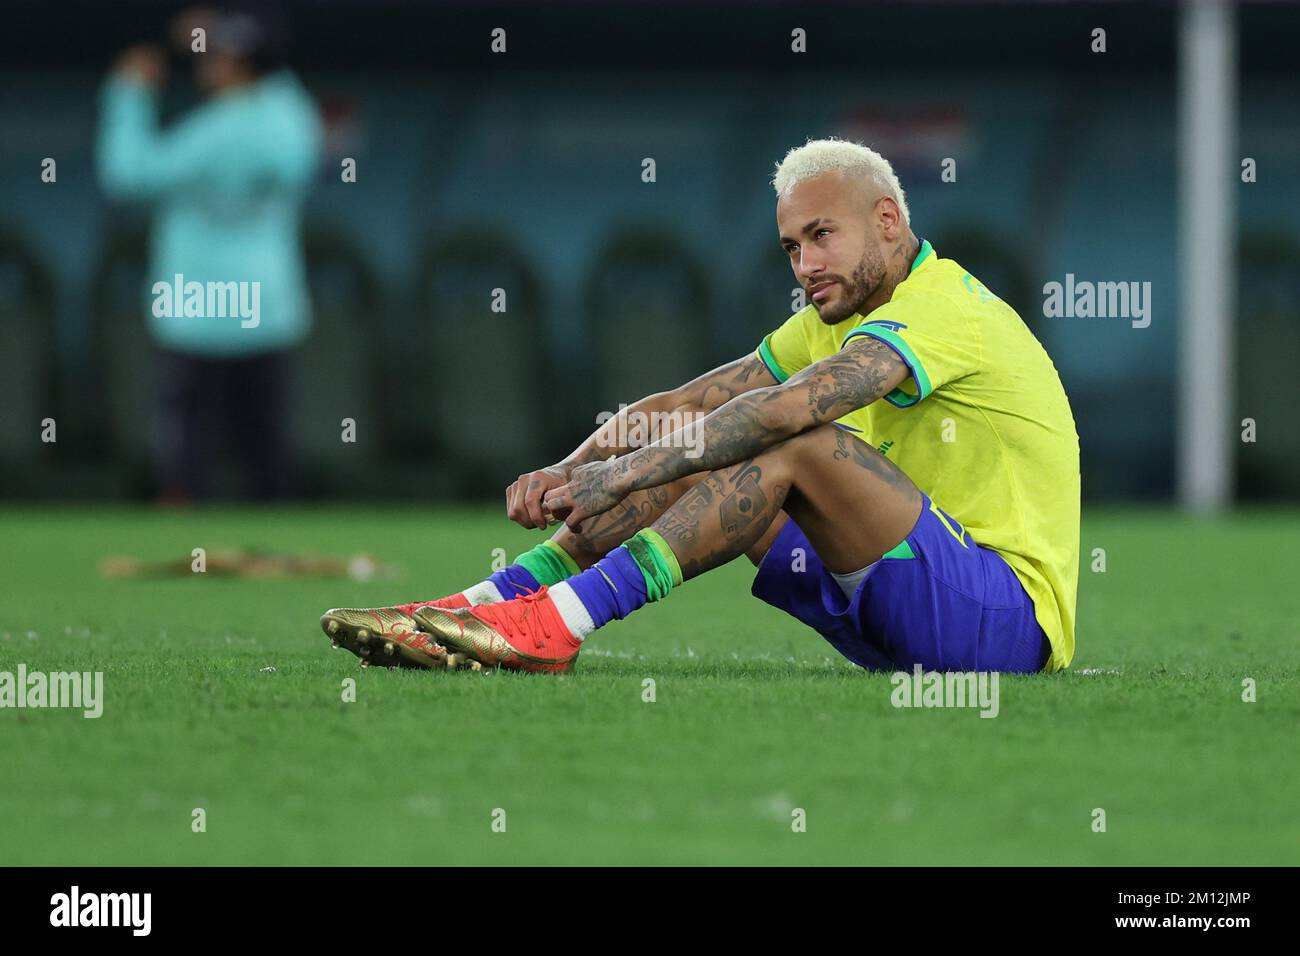 Doha, Qatar. 09th Dec, 2022. Neymar Brazil player cries during a match against Croatia valid for the quarterfinals of the FIFA World Cup in Qatar at Education City Stadium in Doha, Qatar. December 9, 2022 Photo:William Volcov Credit: Brazil Photo Press/Alamy Live News Stock Photo